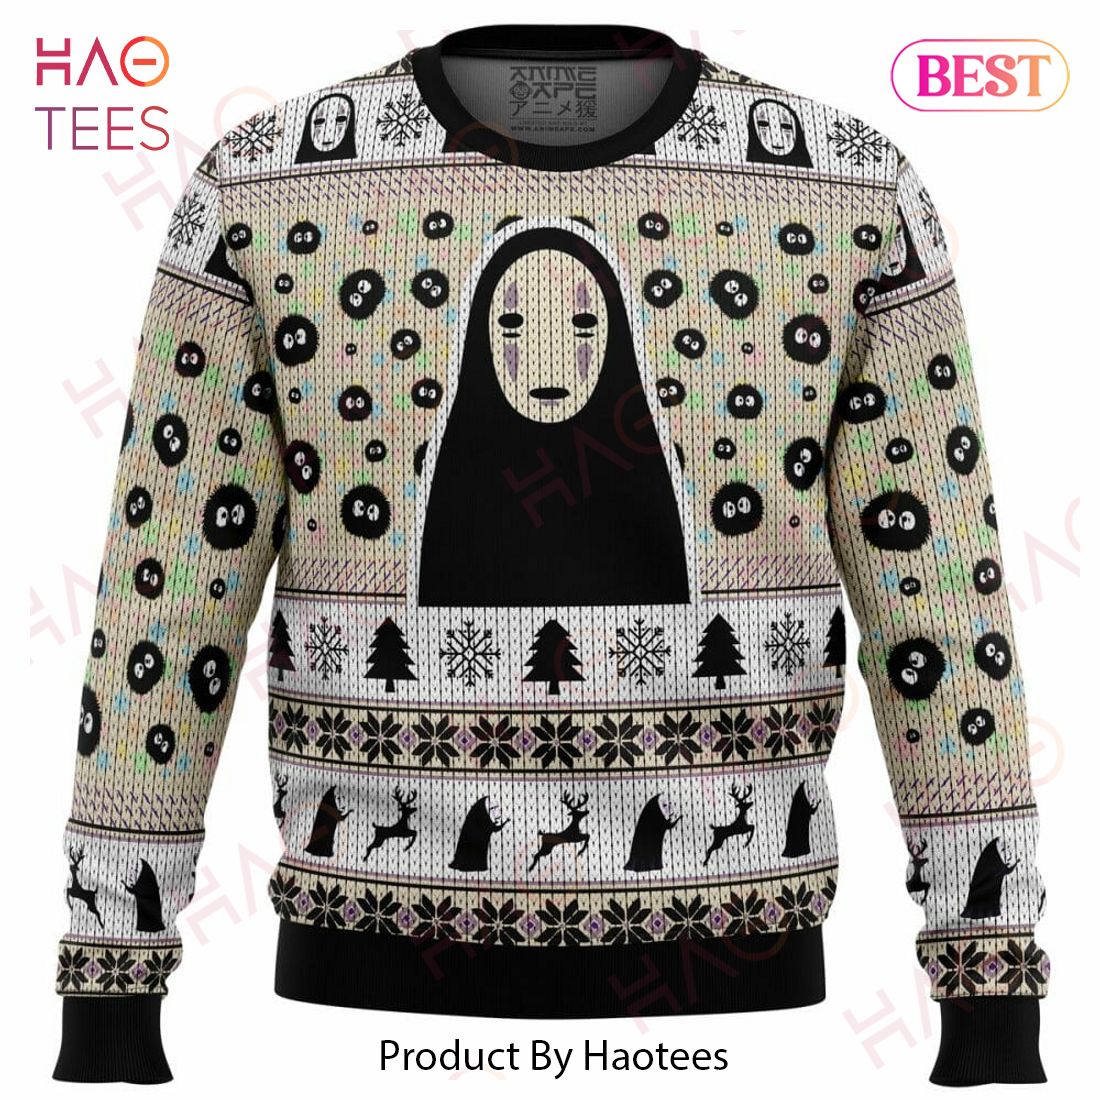 No Face and Soot Sprites Spirited Away Studio Ghibli Ugly Christmas Sweater